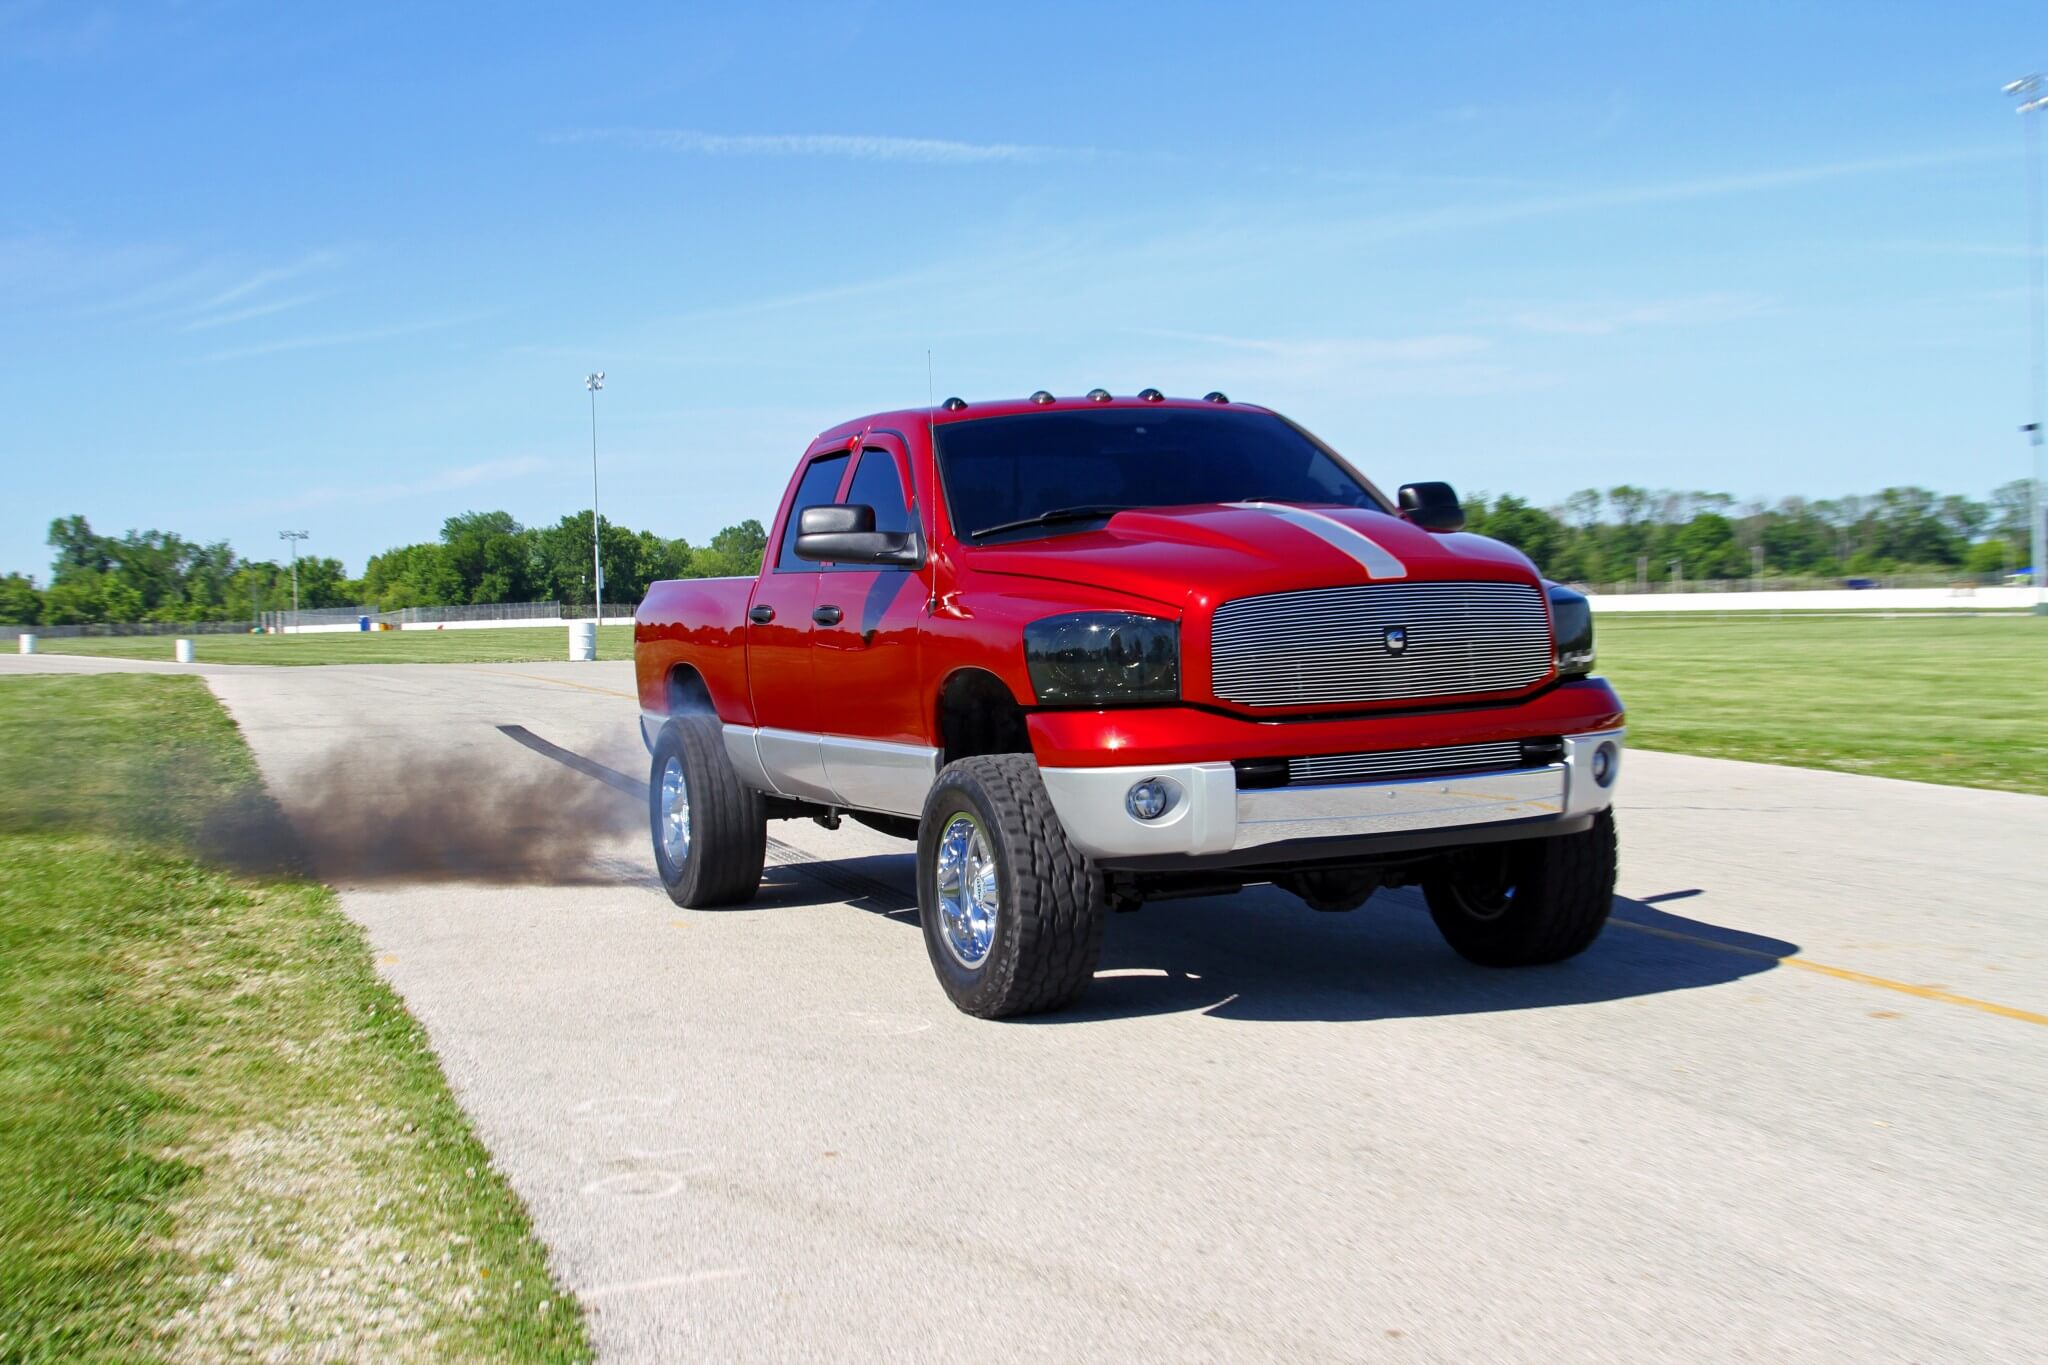 Chase's truck has plenty of power to have fun when he mashes the loud pedal!